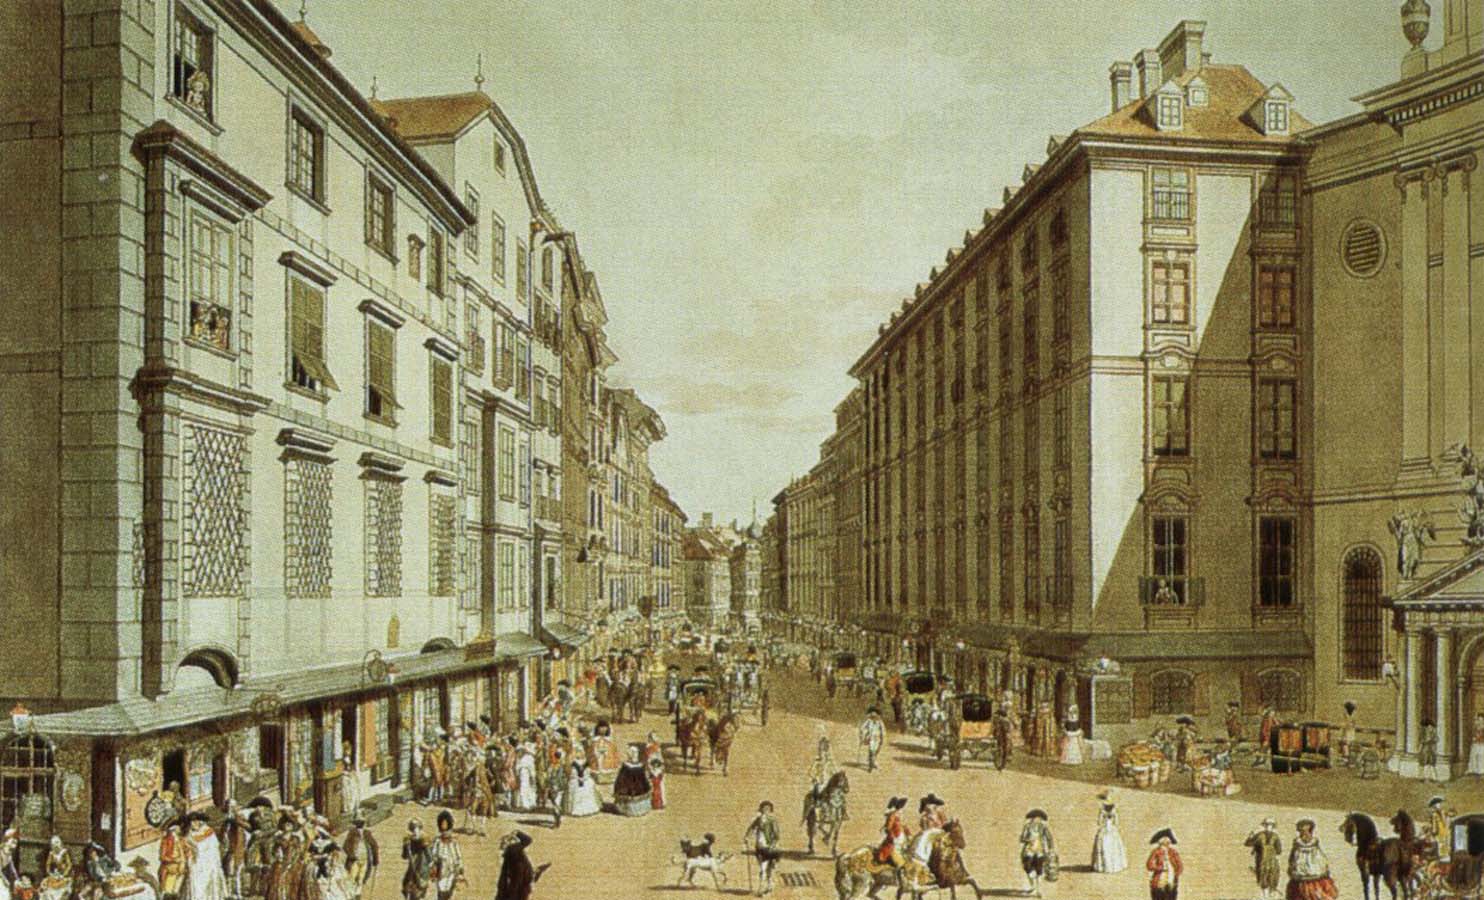 vienna in the 18th century a view of one of its streets, the kohlmarkt